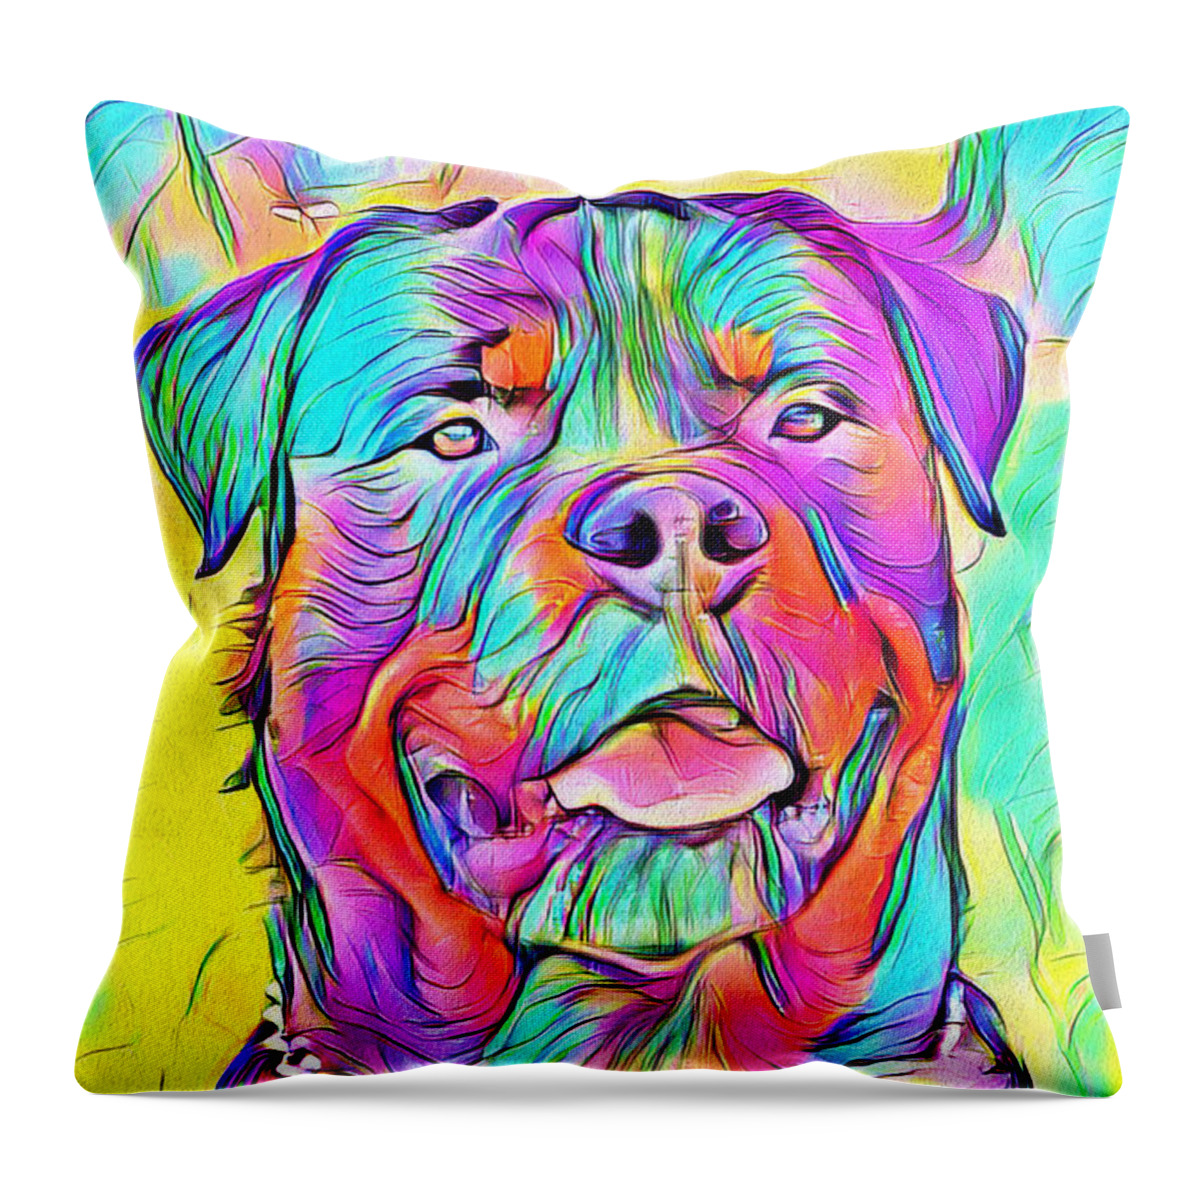 Rottweiler Dog Throw Pillow featuring the digital art Colorful Rottweiler dog portrait - digital painting by Nicko Prints